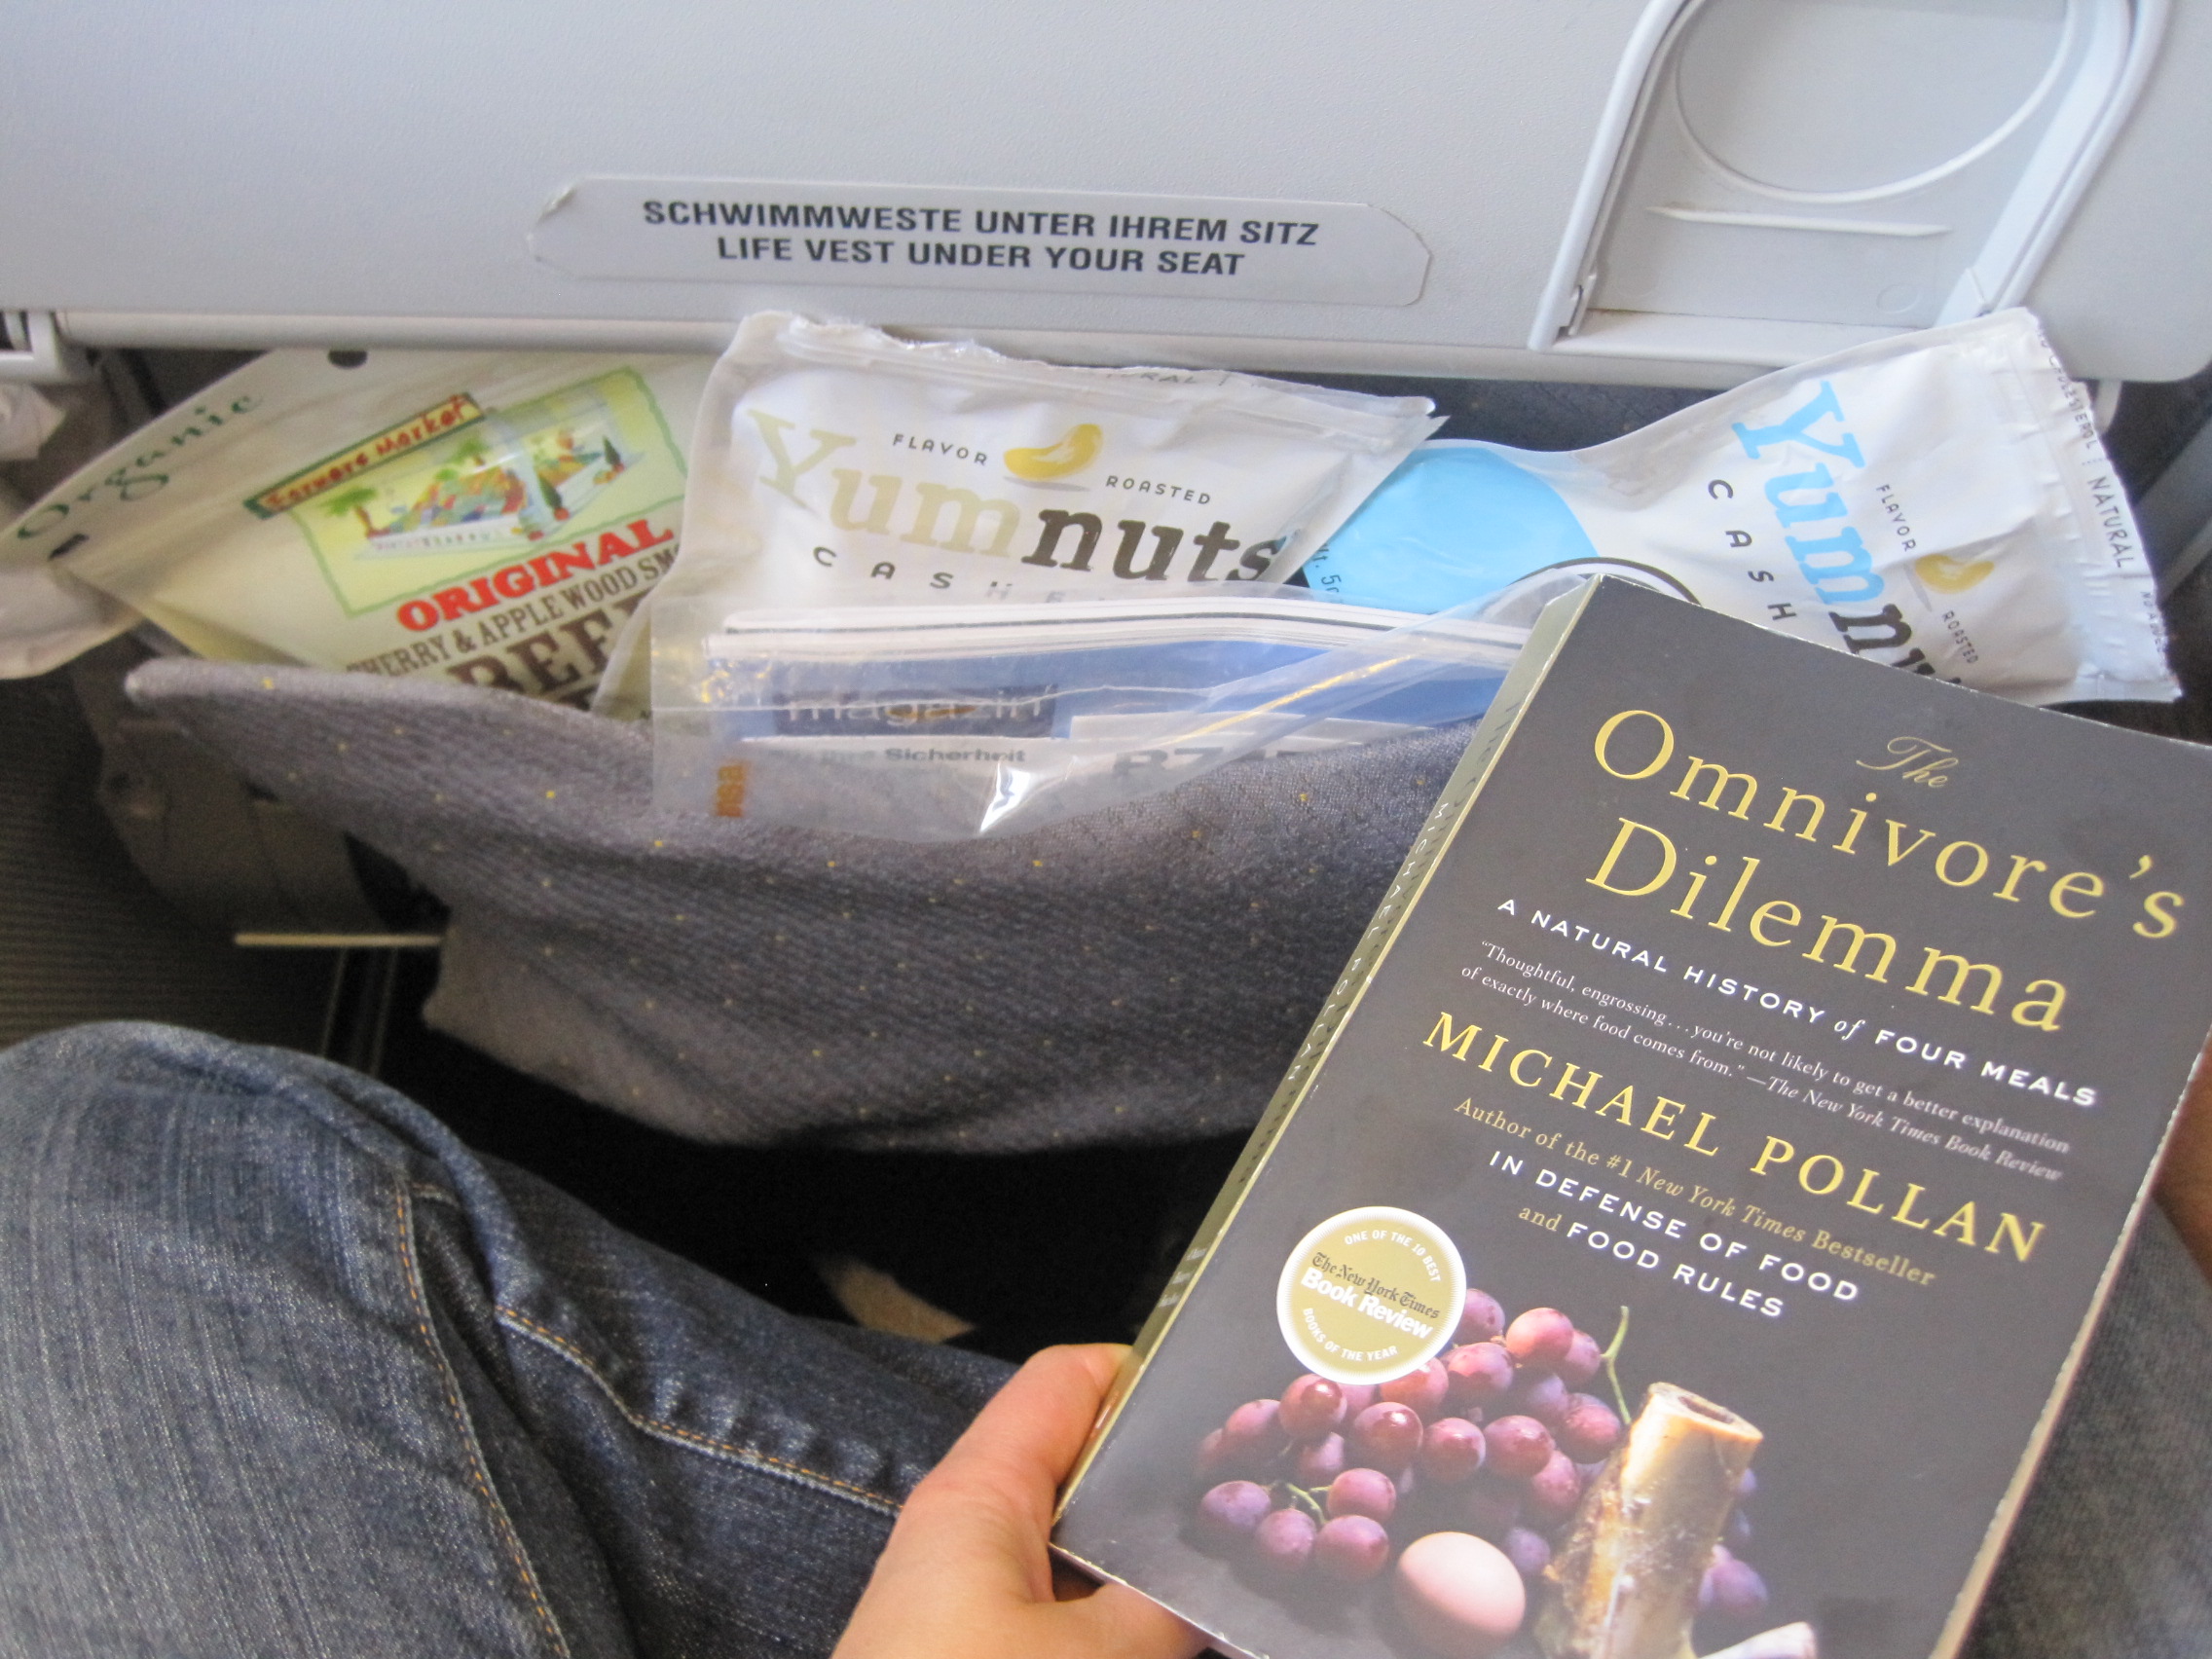 On a flight to Istanbul in July 2011, still packin! I see some beef jerky and plenty of "YumNuts" from Whole Foods! Don't forget to bring a good read!